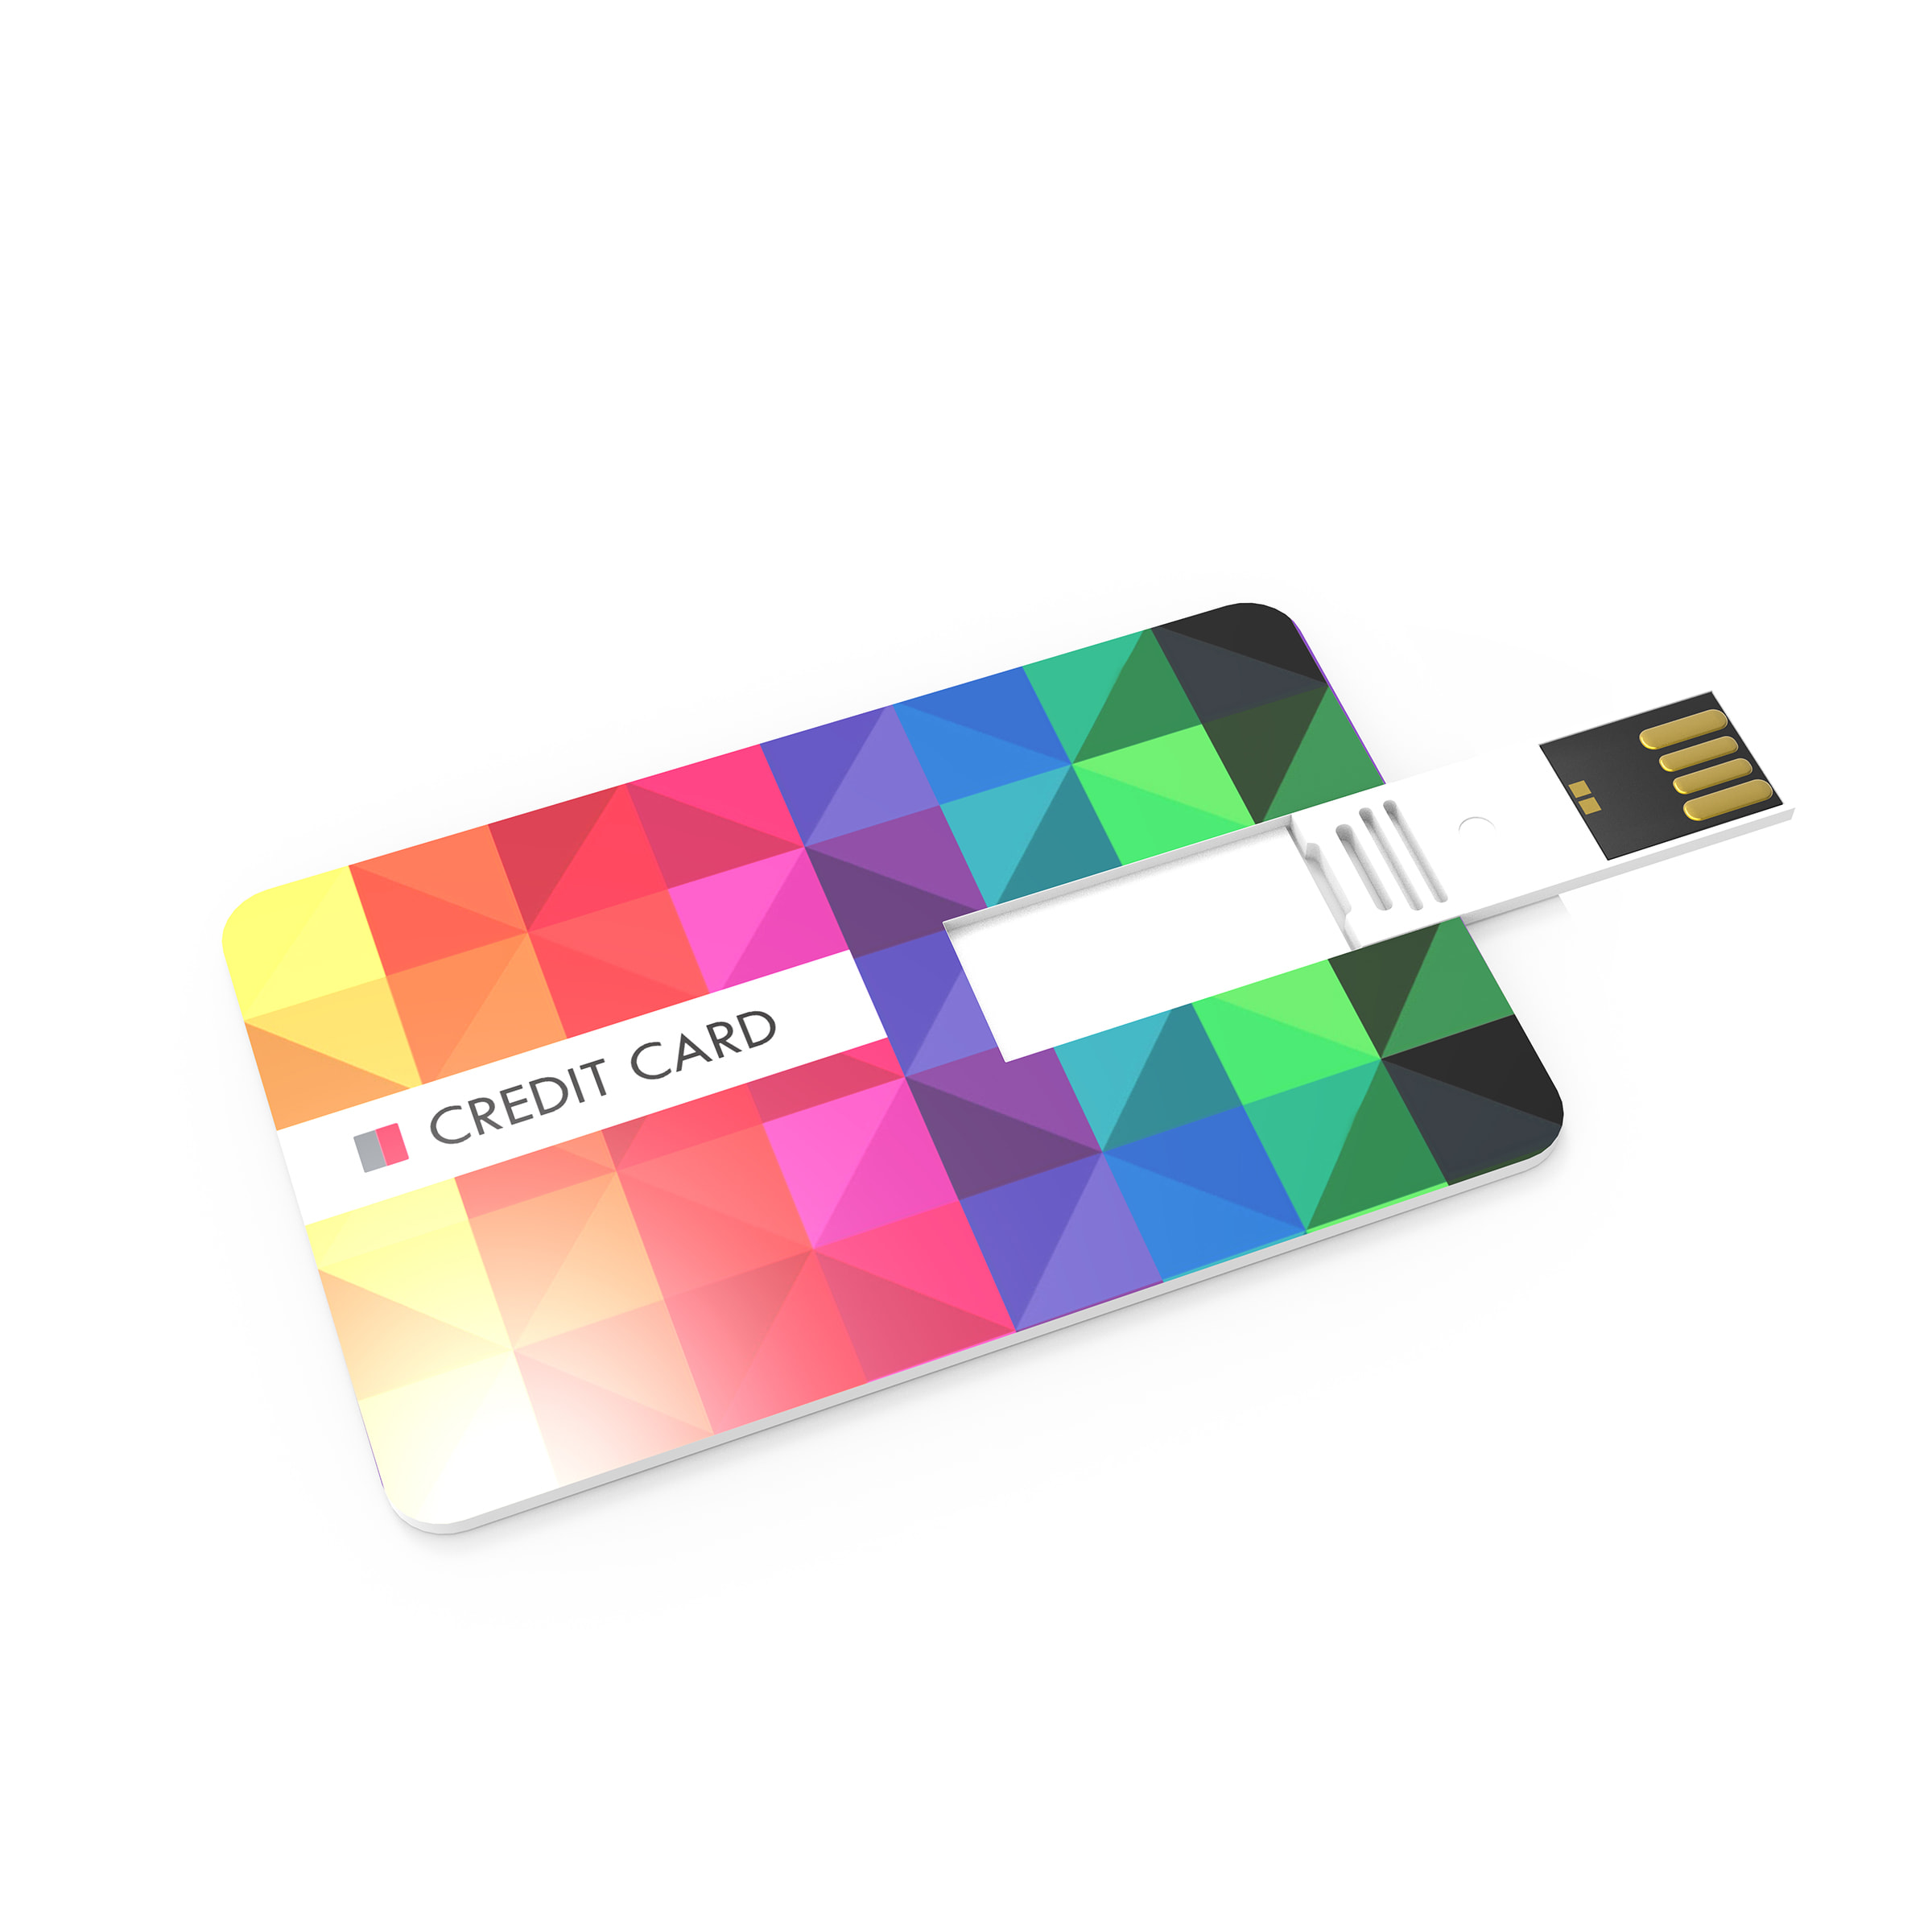 USB Credit Card - Customized logo gifts from Pagerr